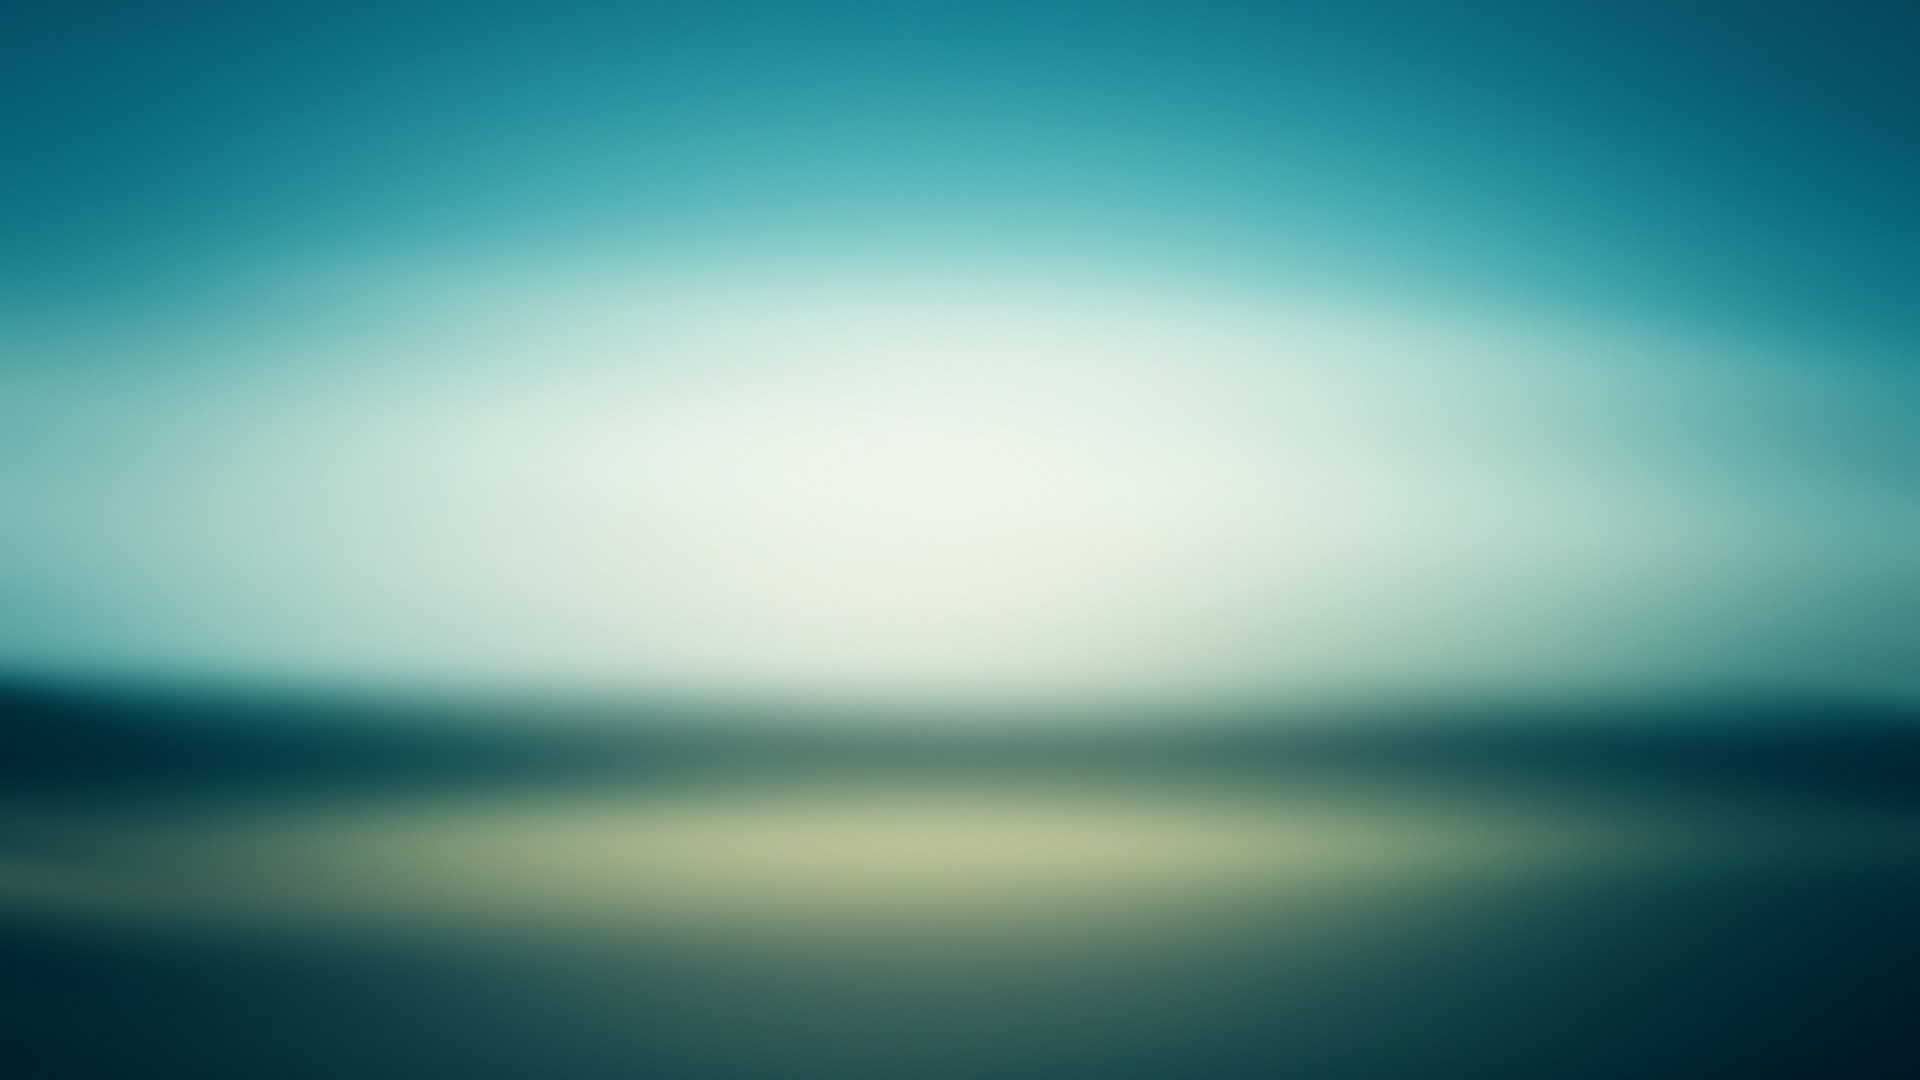 Teal Color Wallpaper For Desktop with image resolution 1920x1080 pixel. You can use this wallpaper as background for your desktop Computer Screensavers, Android or iPhone smartphones